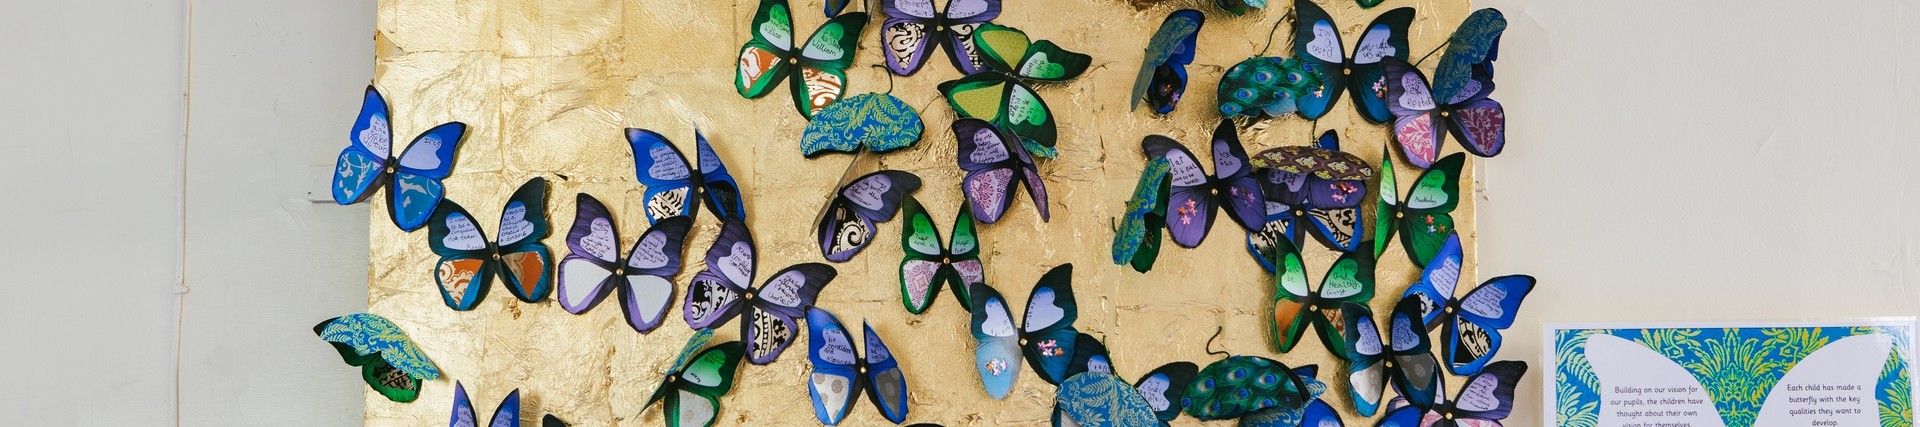 Description: Arts activity at Horningsham Primary School. A wall full of butterflies made out of paper. 